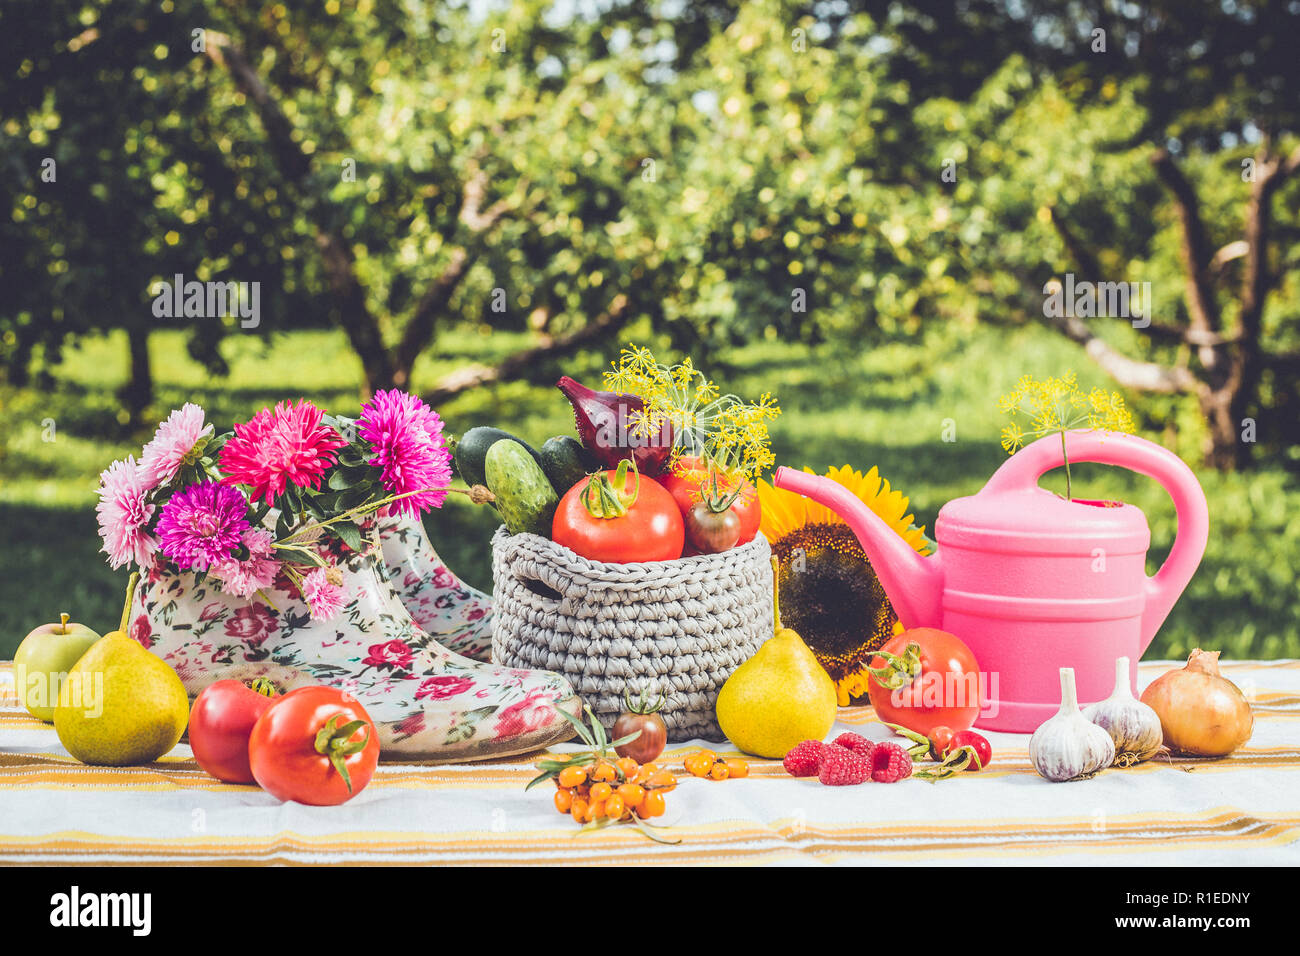 Seasonal gardening set background with various autumn fruits, vegetables gardener tools, pink watering can, white pink floral ankle wellies, outdoors Stock Photo